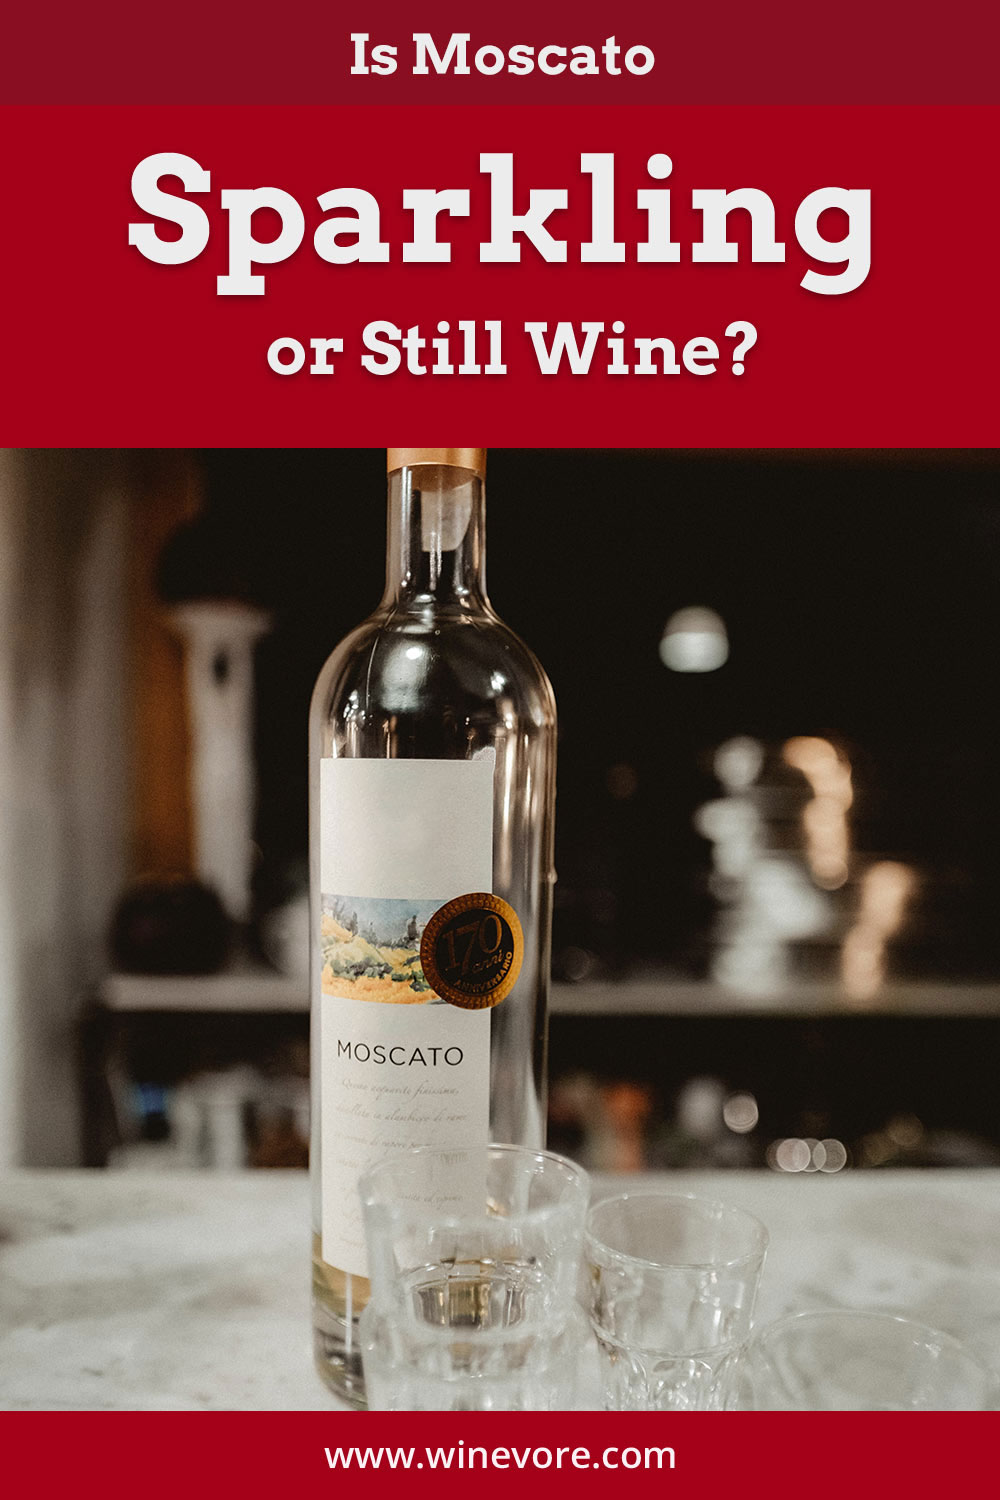 A bottle of Moscato near some glasses - Is it Sparkling or Still Wine?